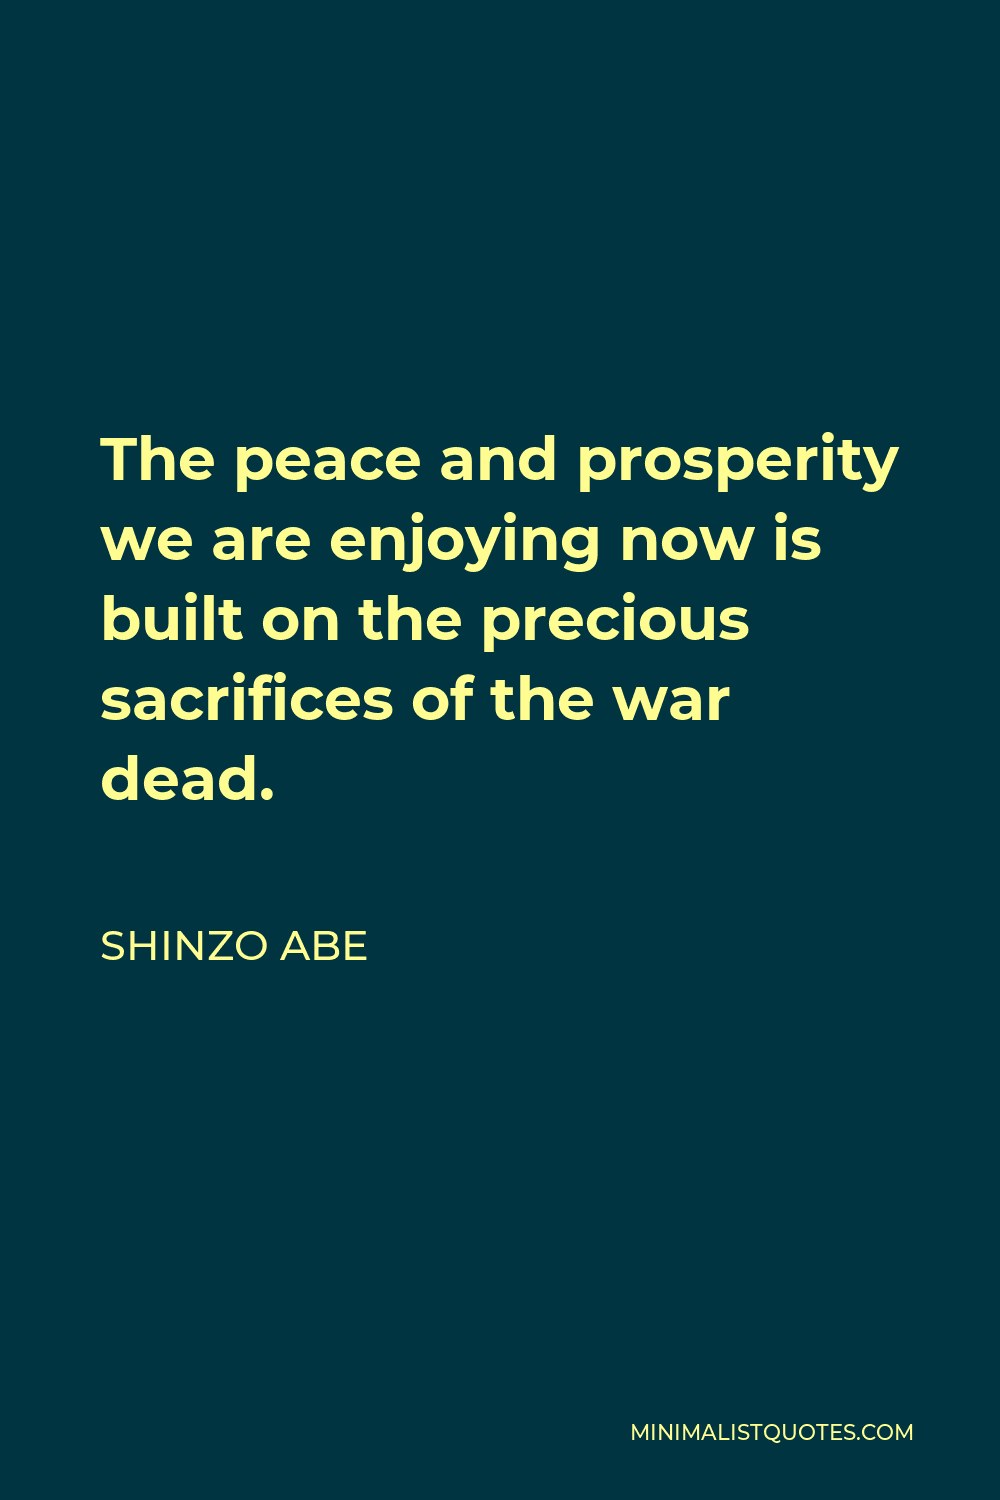 Shinzo Abe Quote - The peace and prosperity we are enjoying now is built on the precious sacrifices of the war dead.